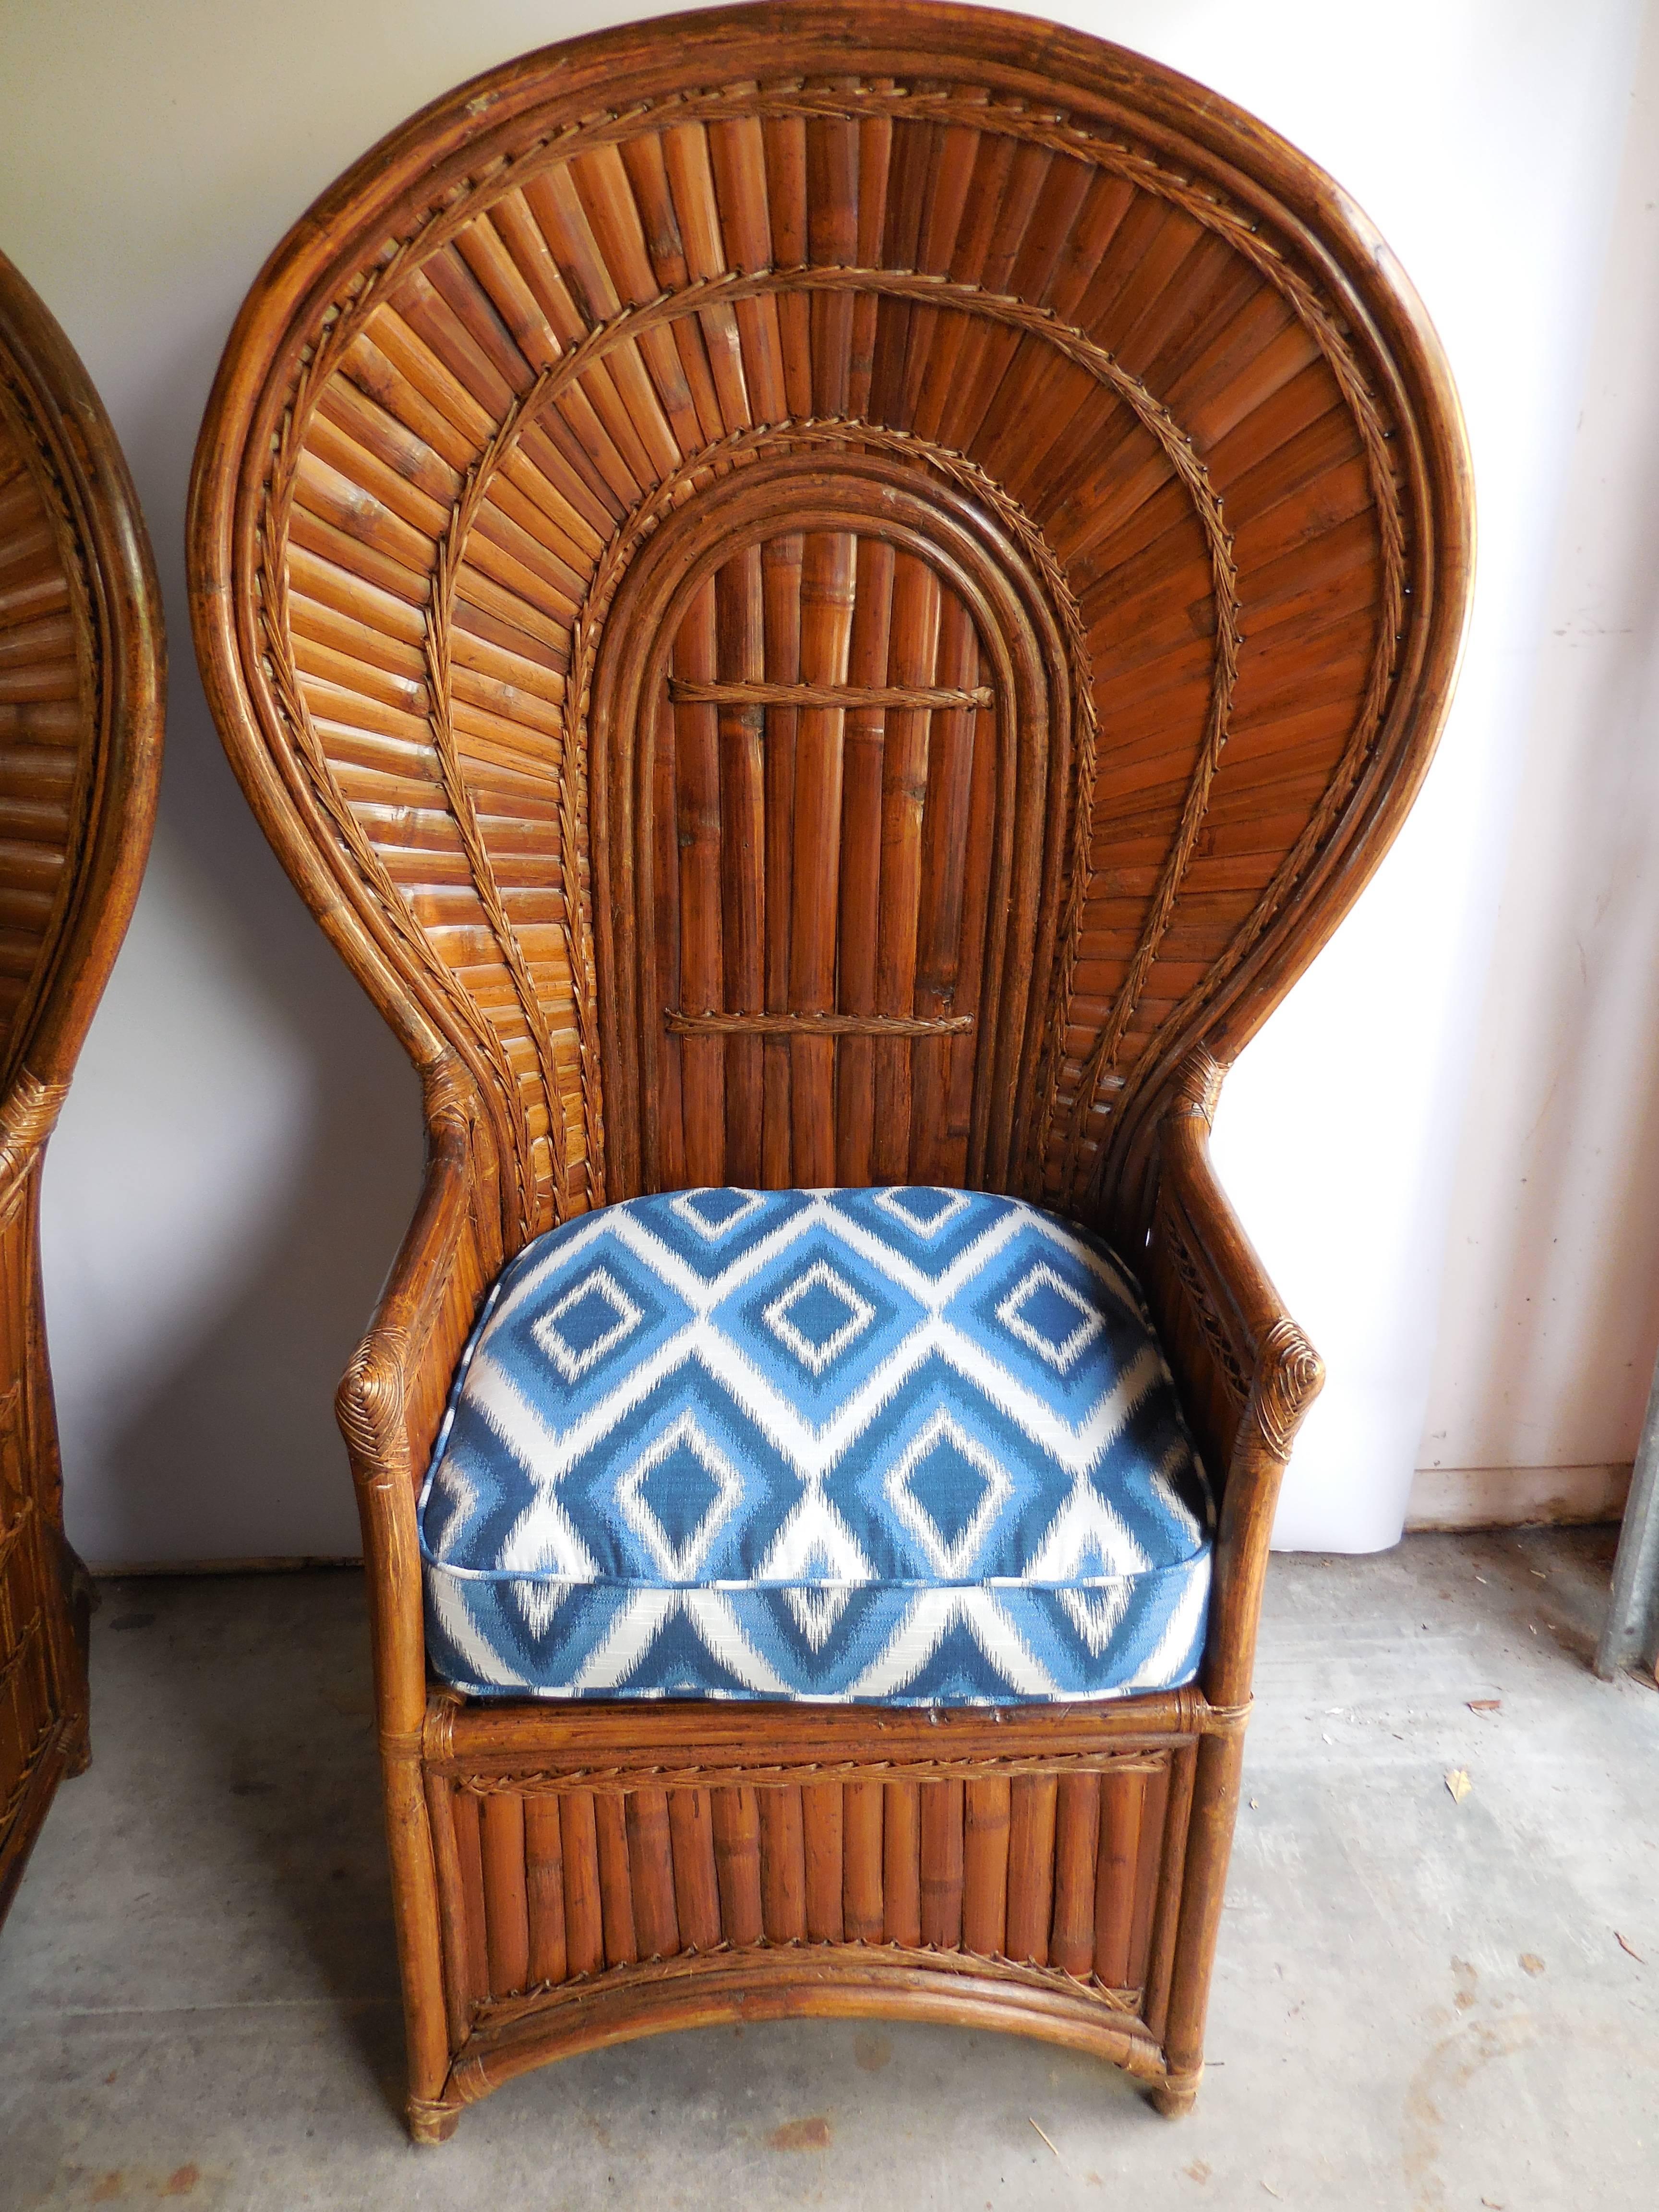 Pair of bamboo Peacock chairs, circa 1960. Both chairs have a hidden storage compartment, perfect for blankets, towels or pillows. In excellent condition.